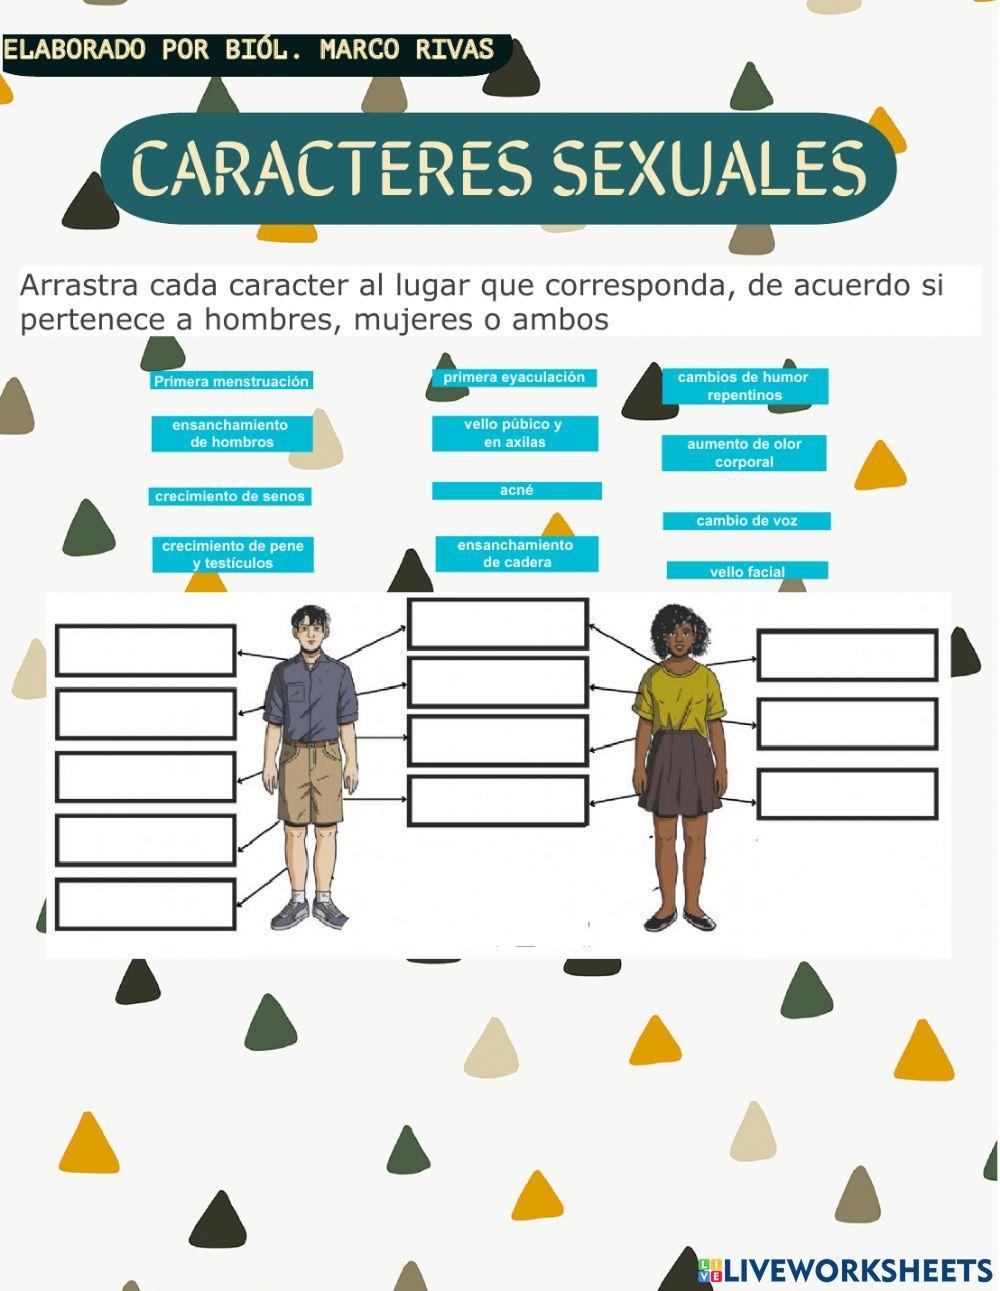 Caracteres sexuales